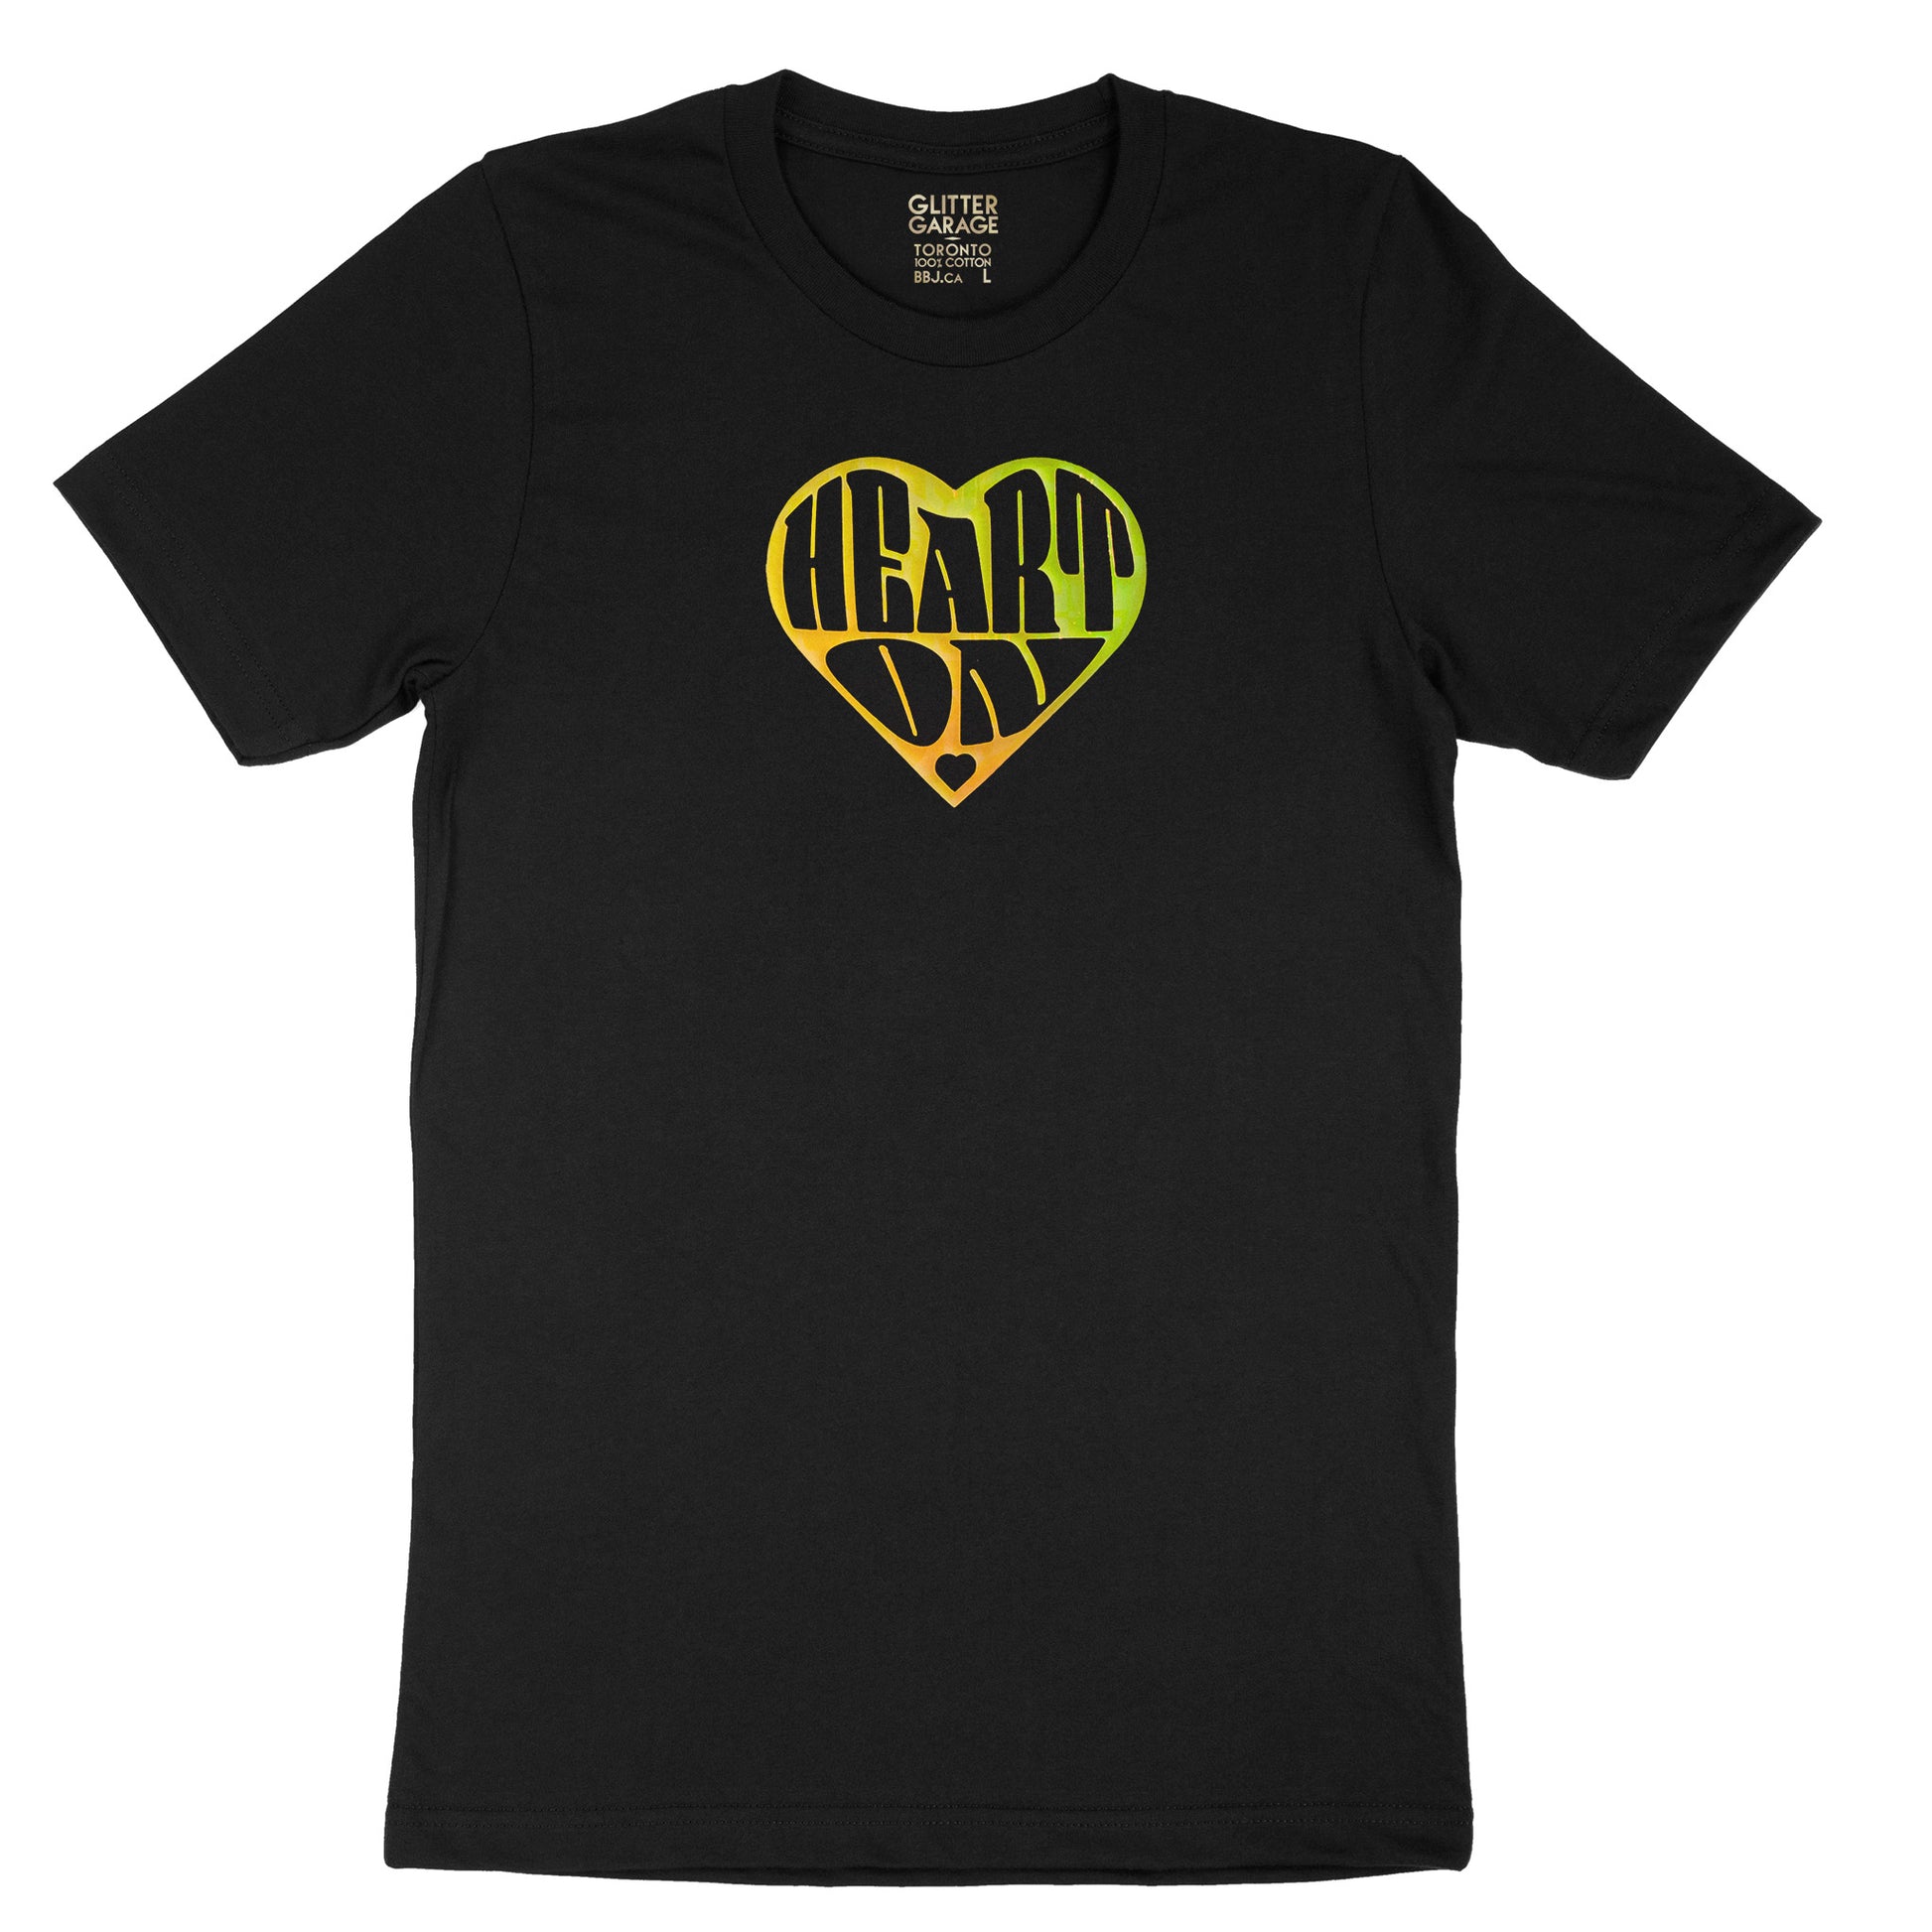 Black unisex cotton t-shirt with "heart on" heart-shaped graphic in tropical gold holographic vinyl by BBJ / Glitter Garage